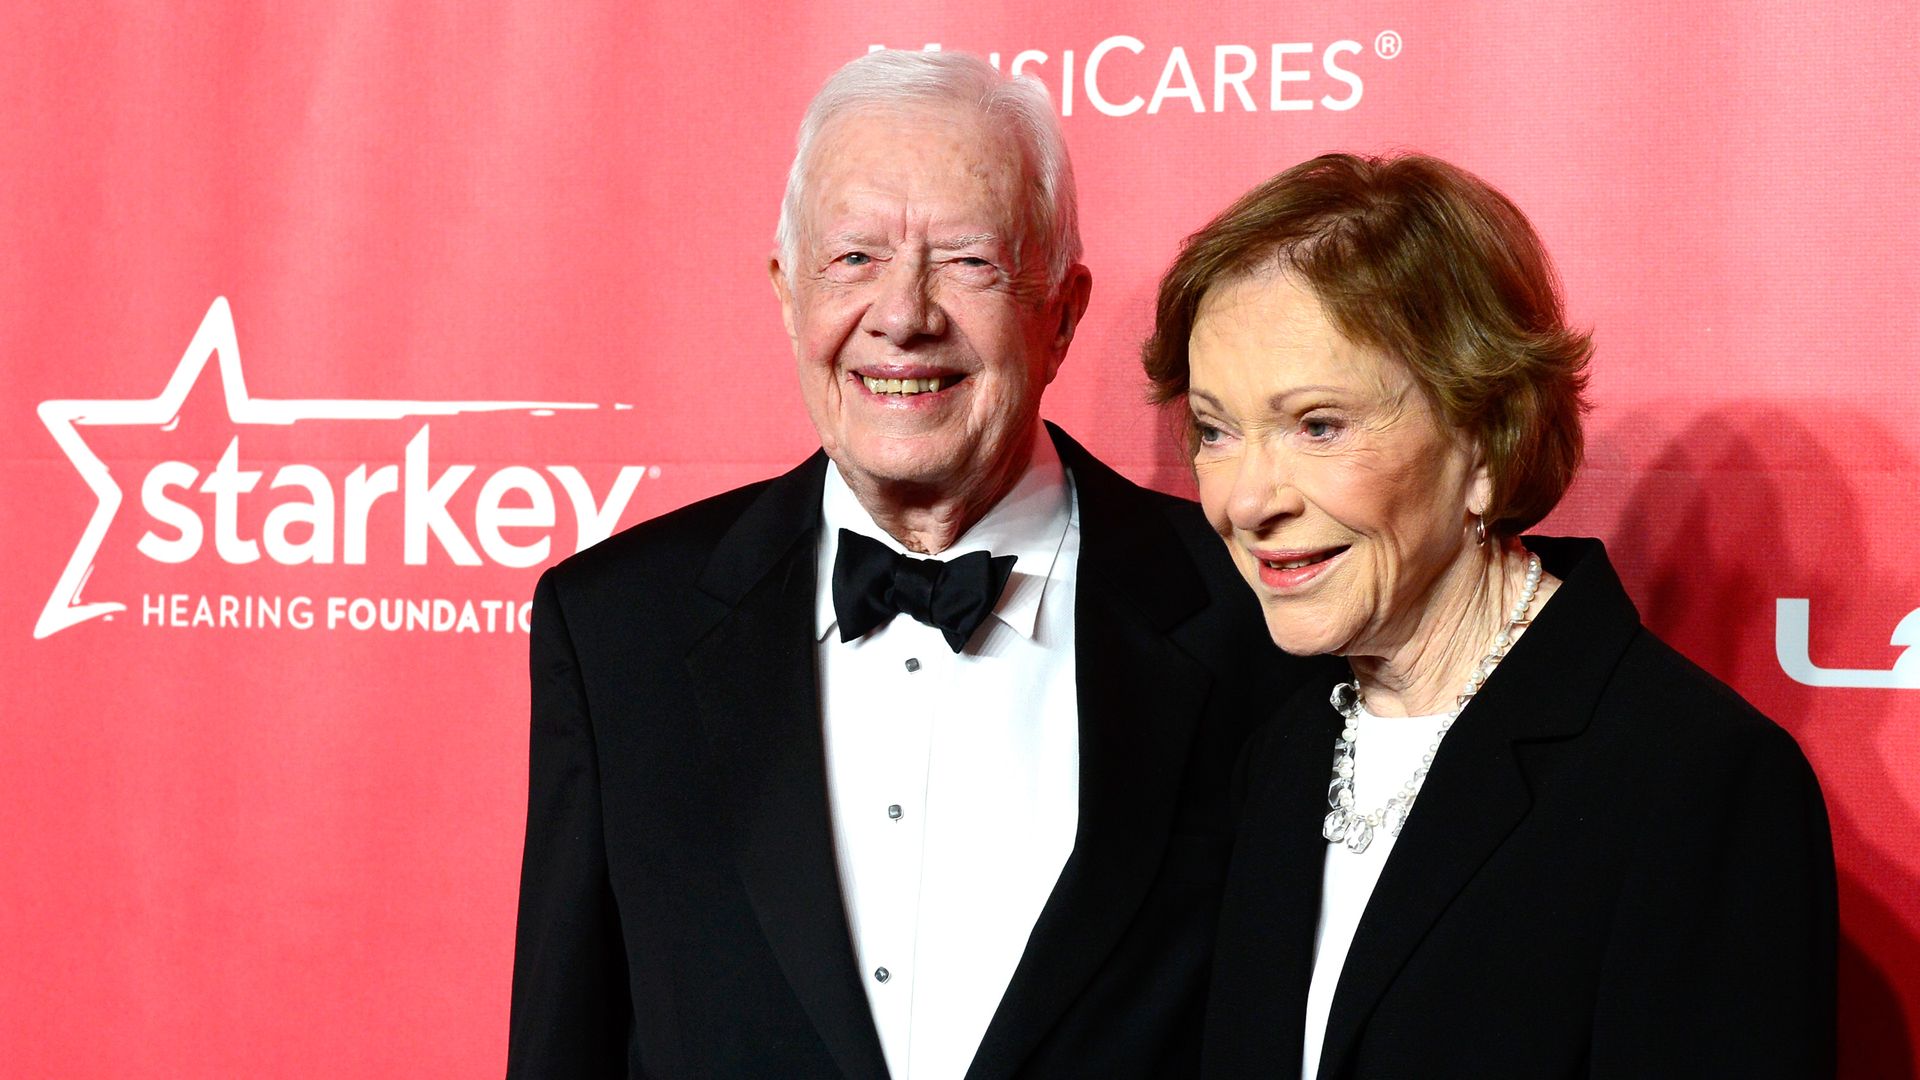 President Jimmy Carter (L) and former First Lady Rosalynn Carter attend the 25th anniversary MusiCares 2015